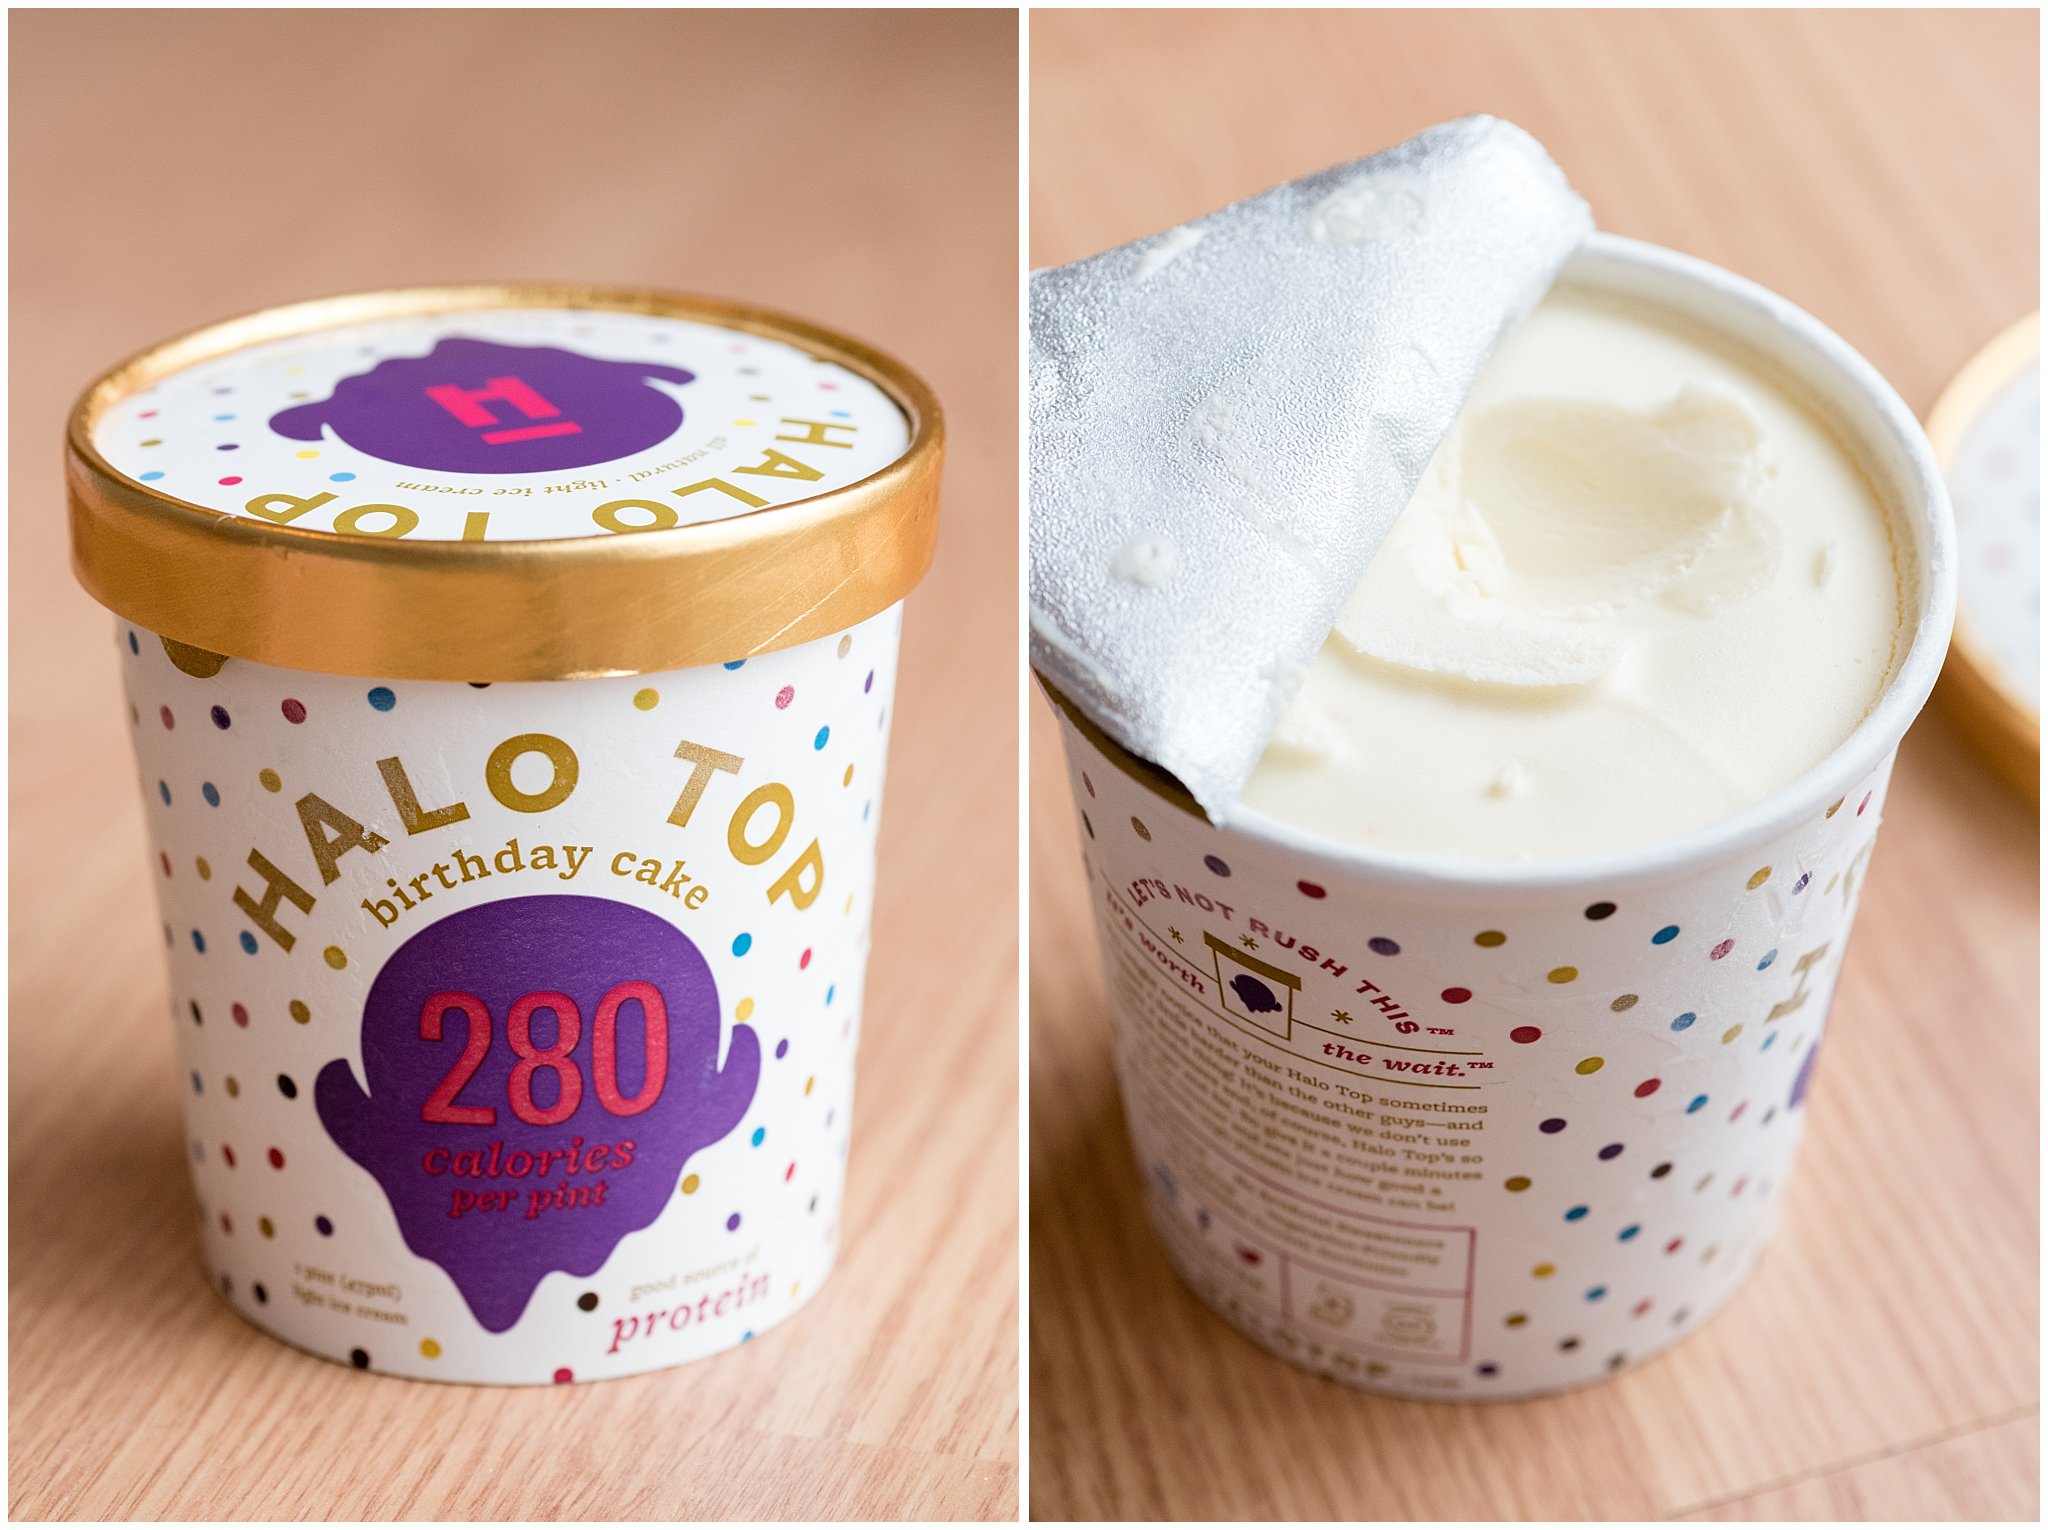 Birthday Cake | Review of Halo Top Ice Cream Flavors